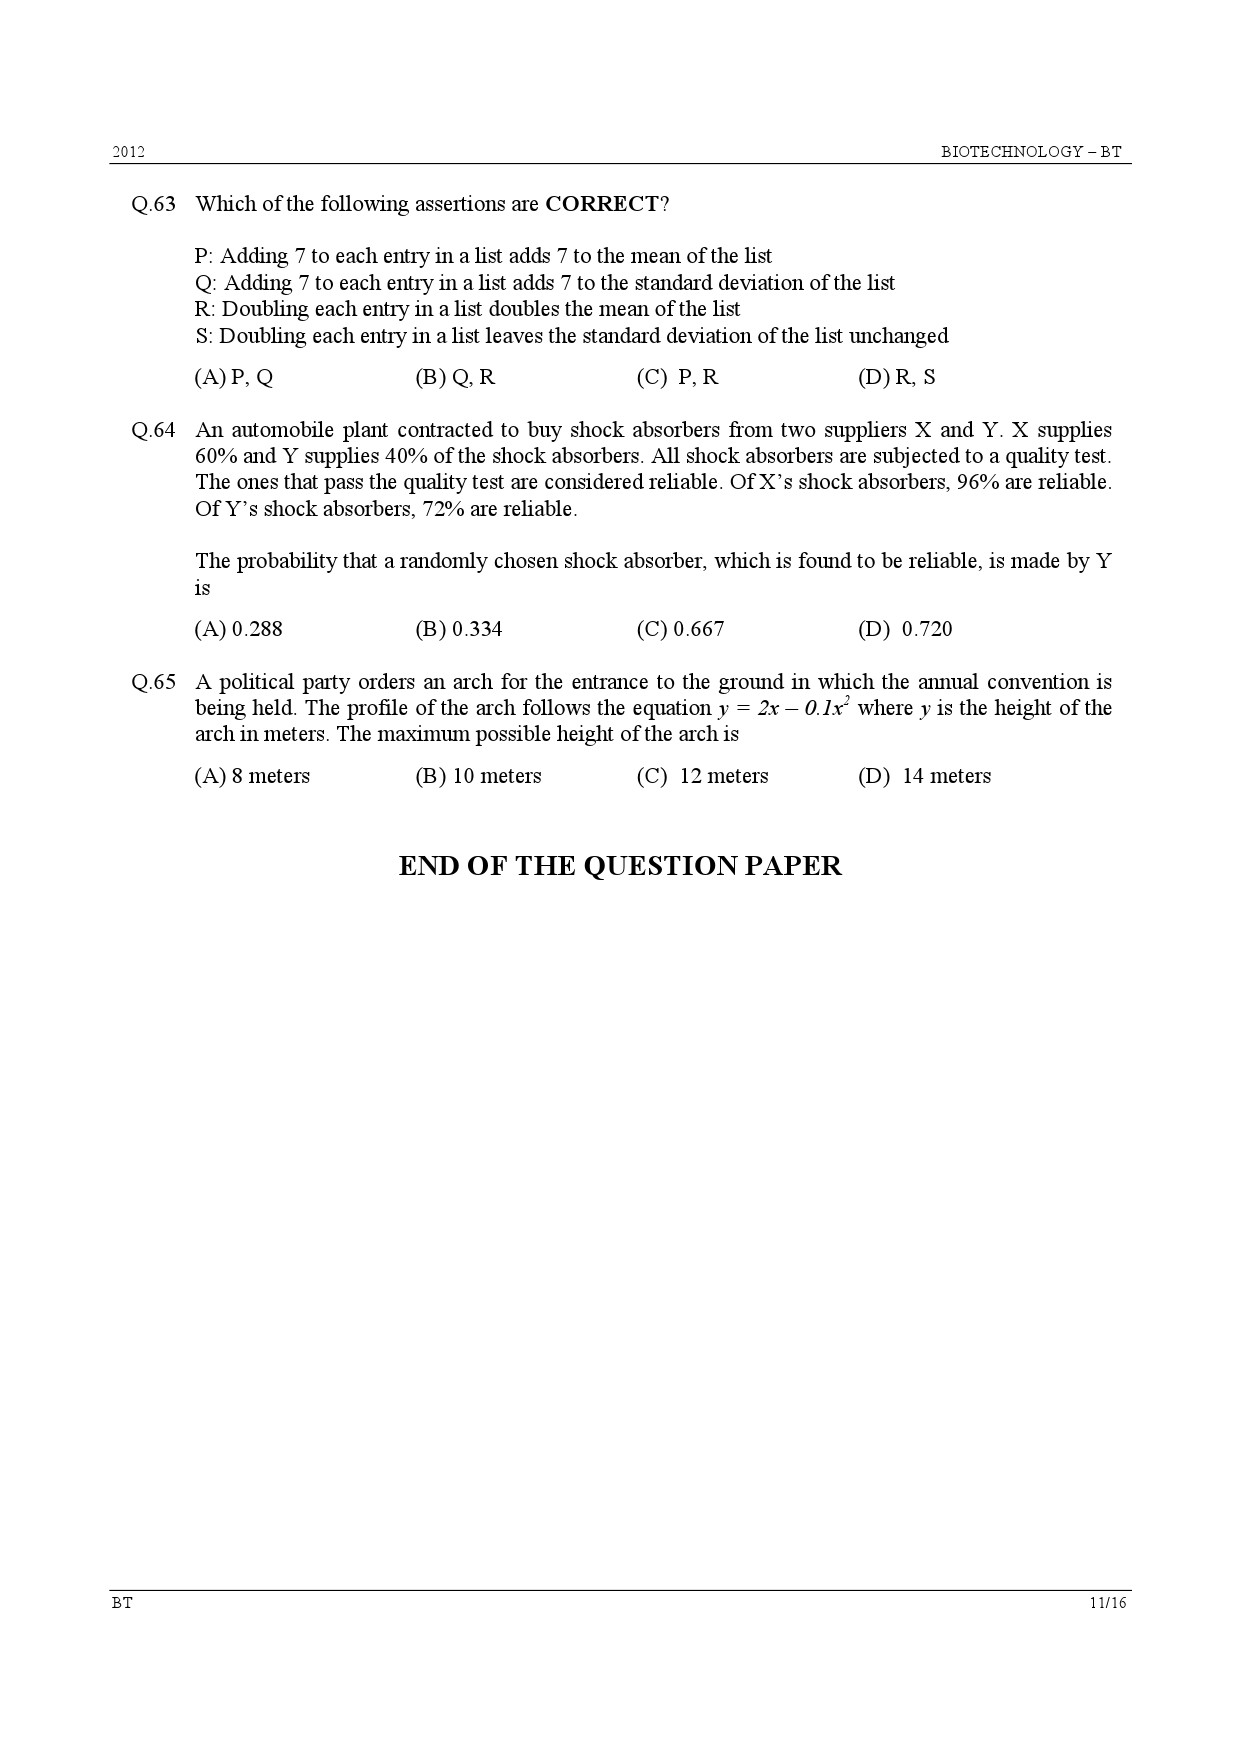 GATE Exam Question Paper 2012 Biotechnology 11